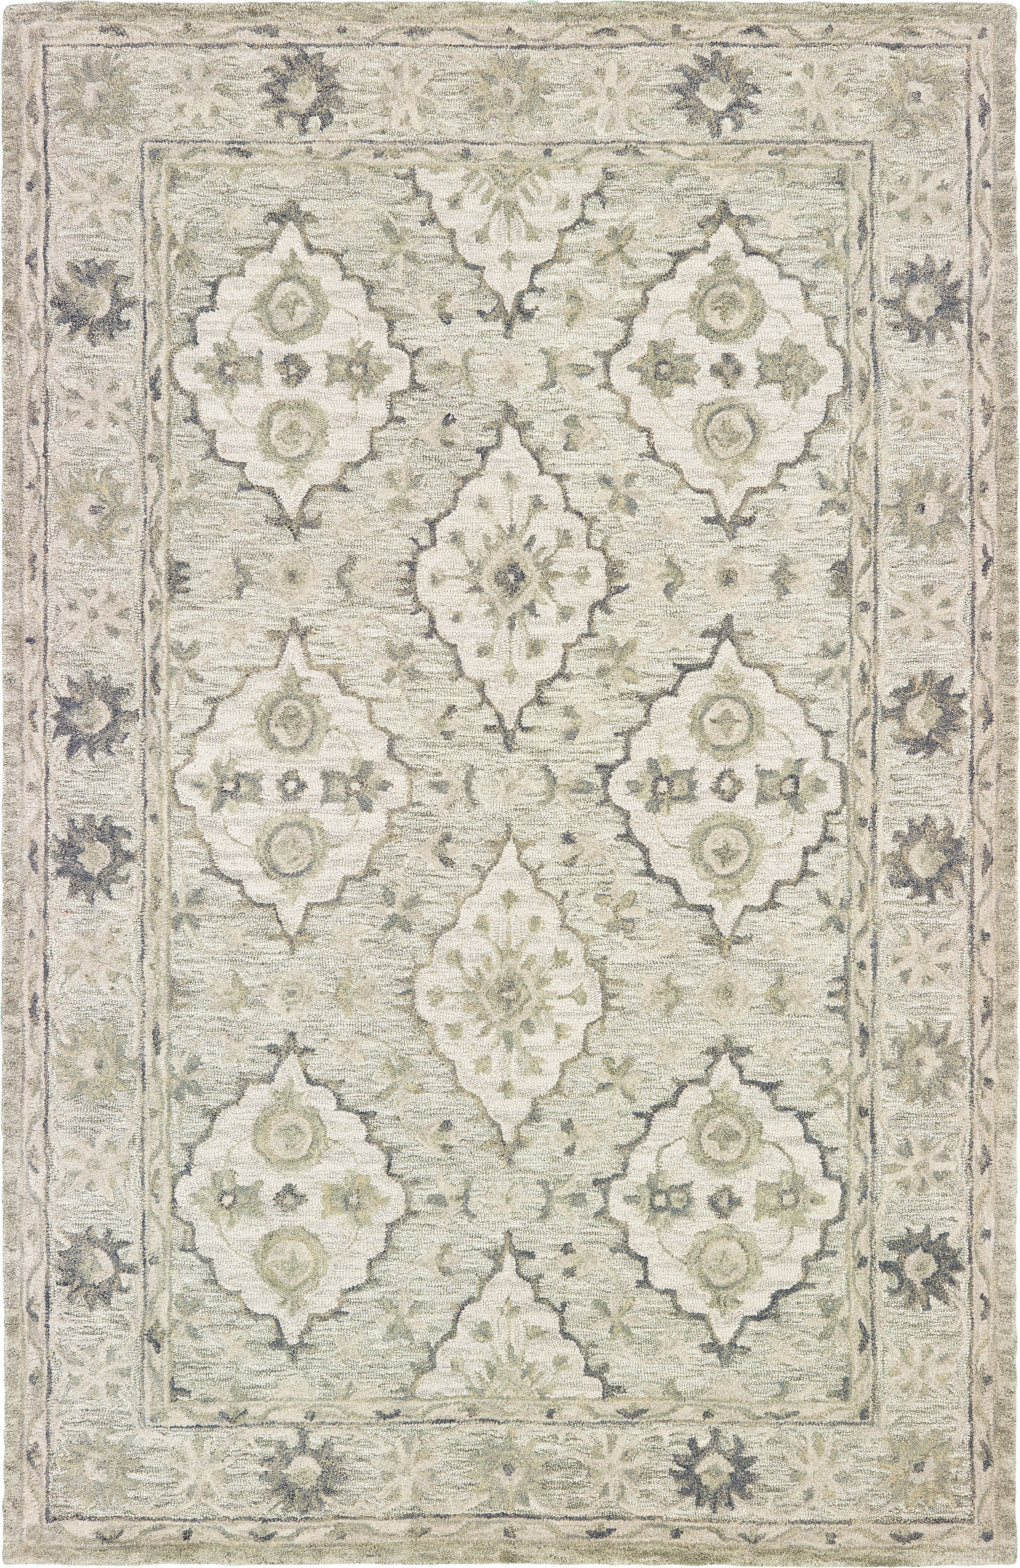 LR Resources Modern Traditions 81286 Sea Weed Area Rug main image